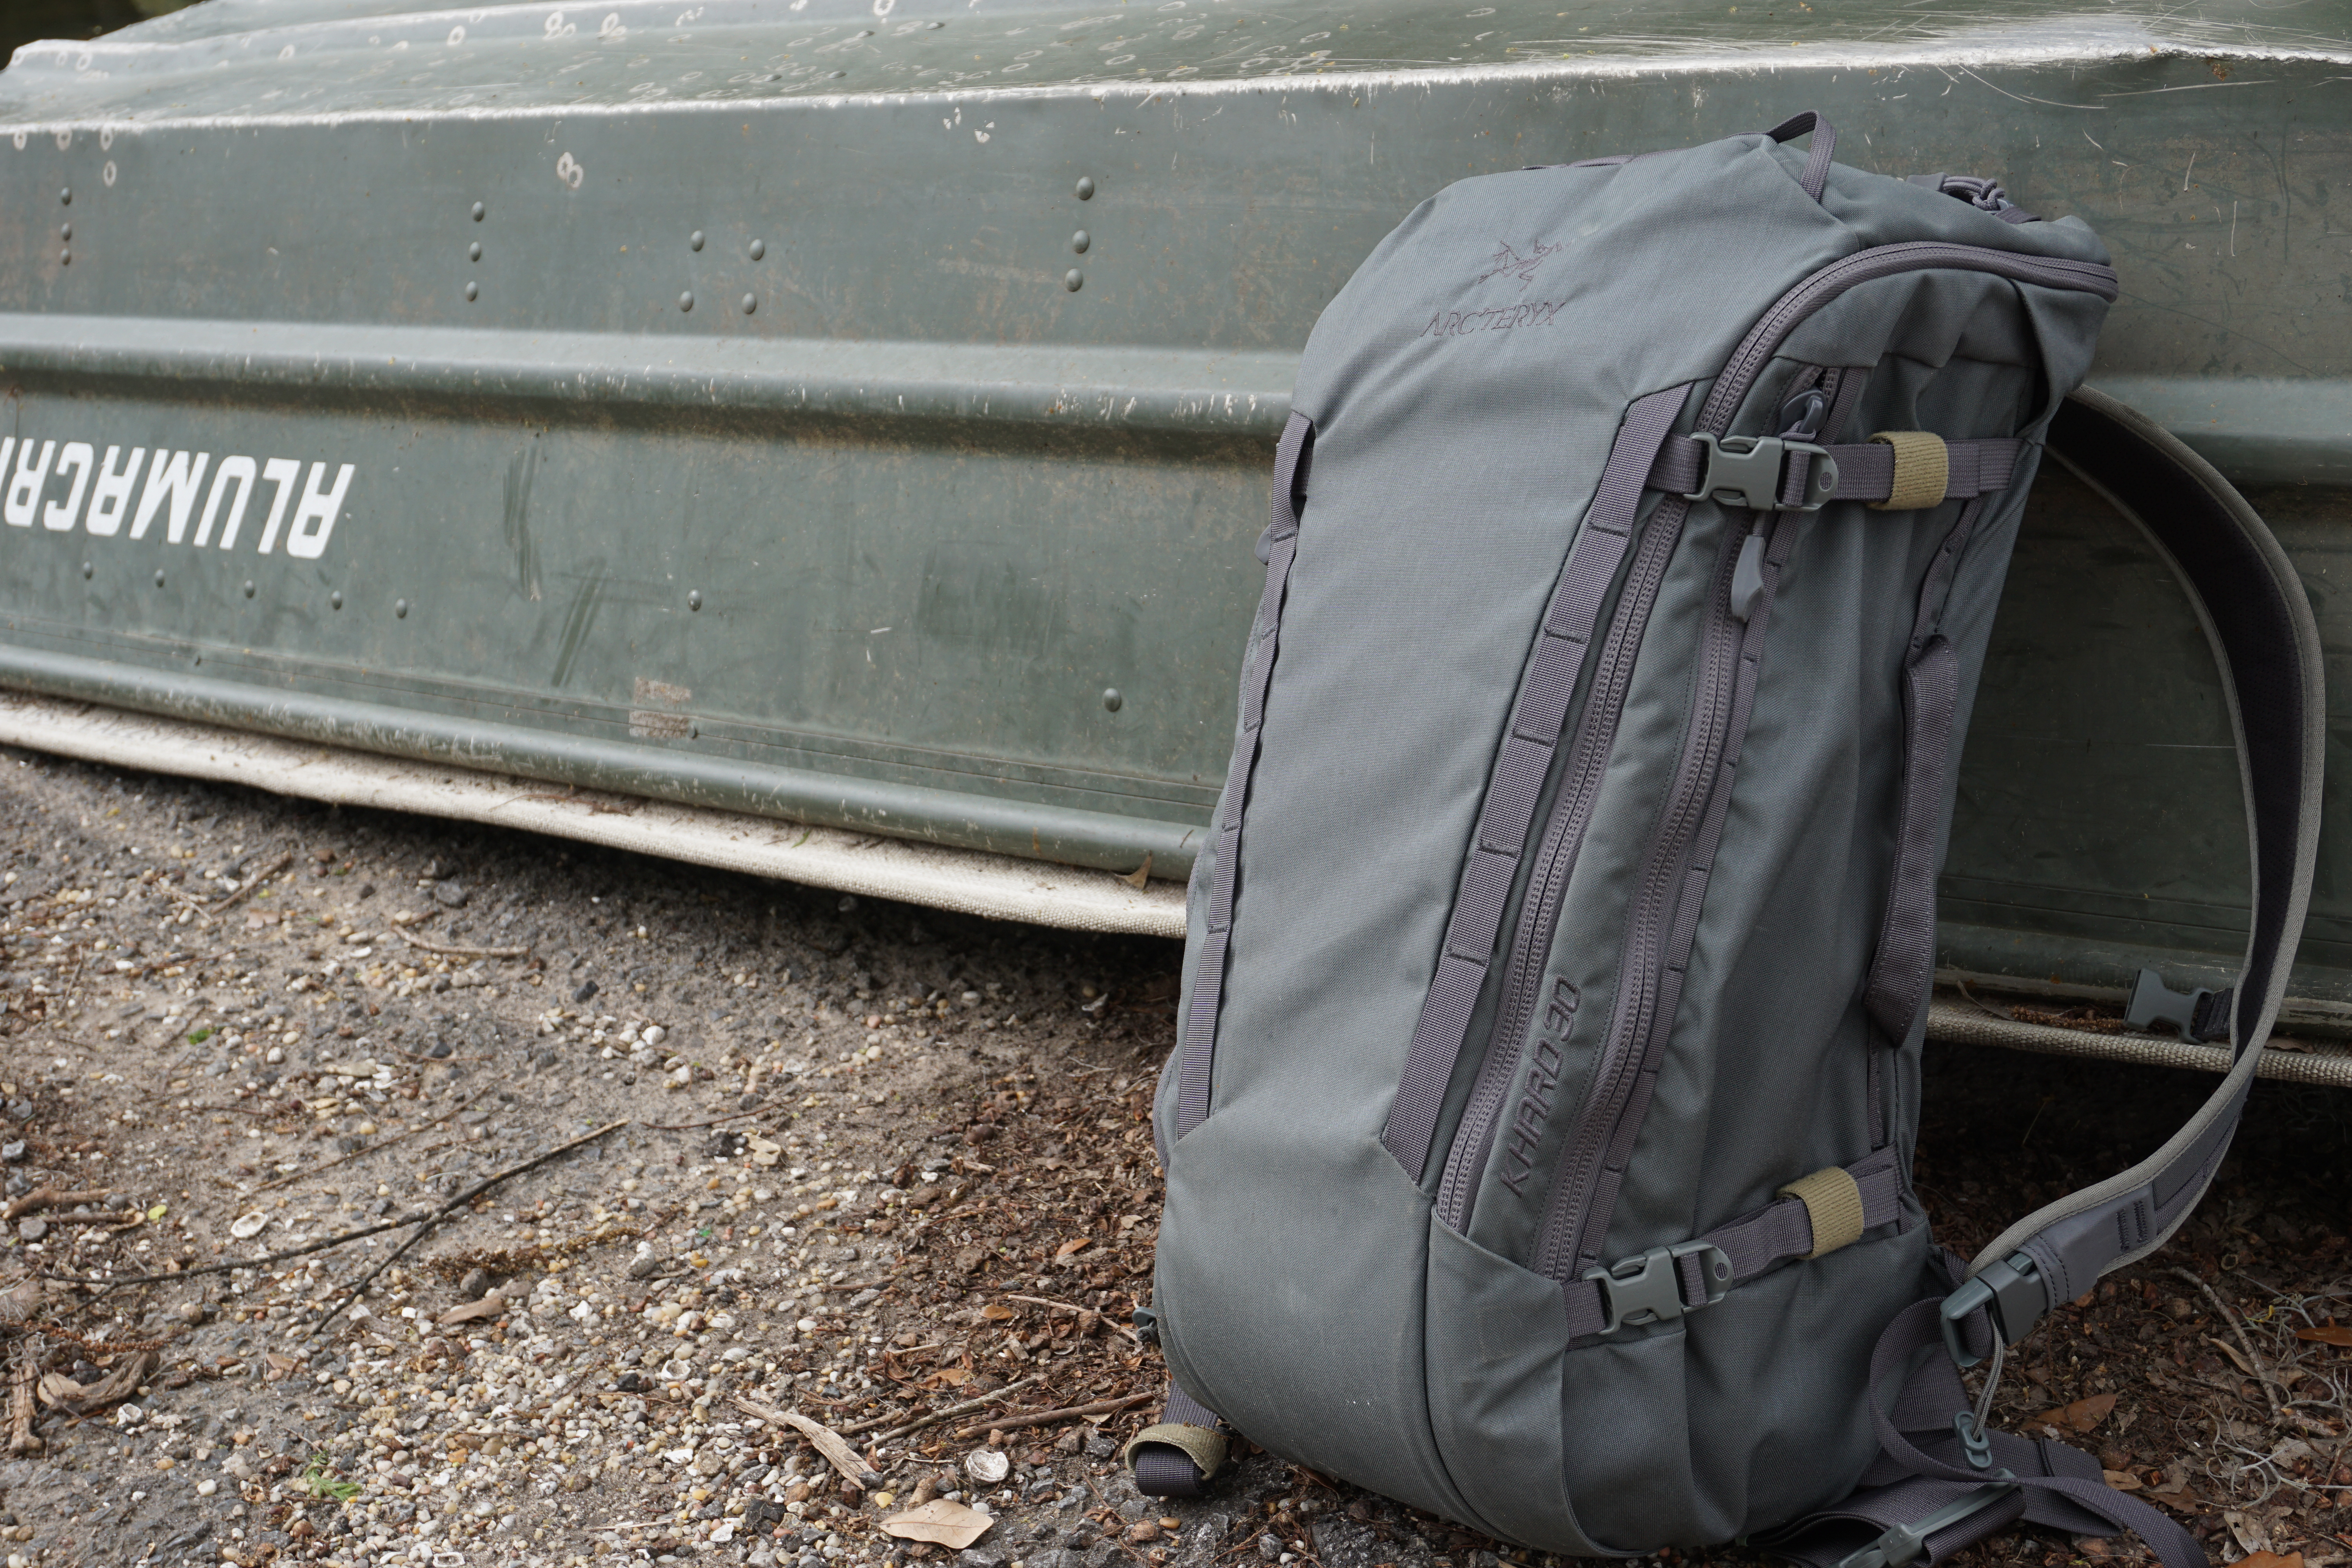 Arc'teryx LEAF Assault Pack 30 / Khard 30: Review - The Perfect Pack